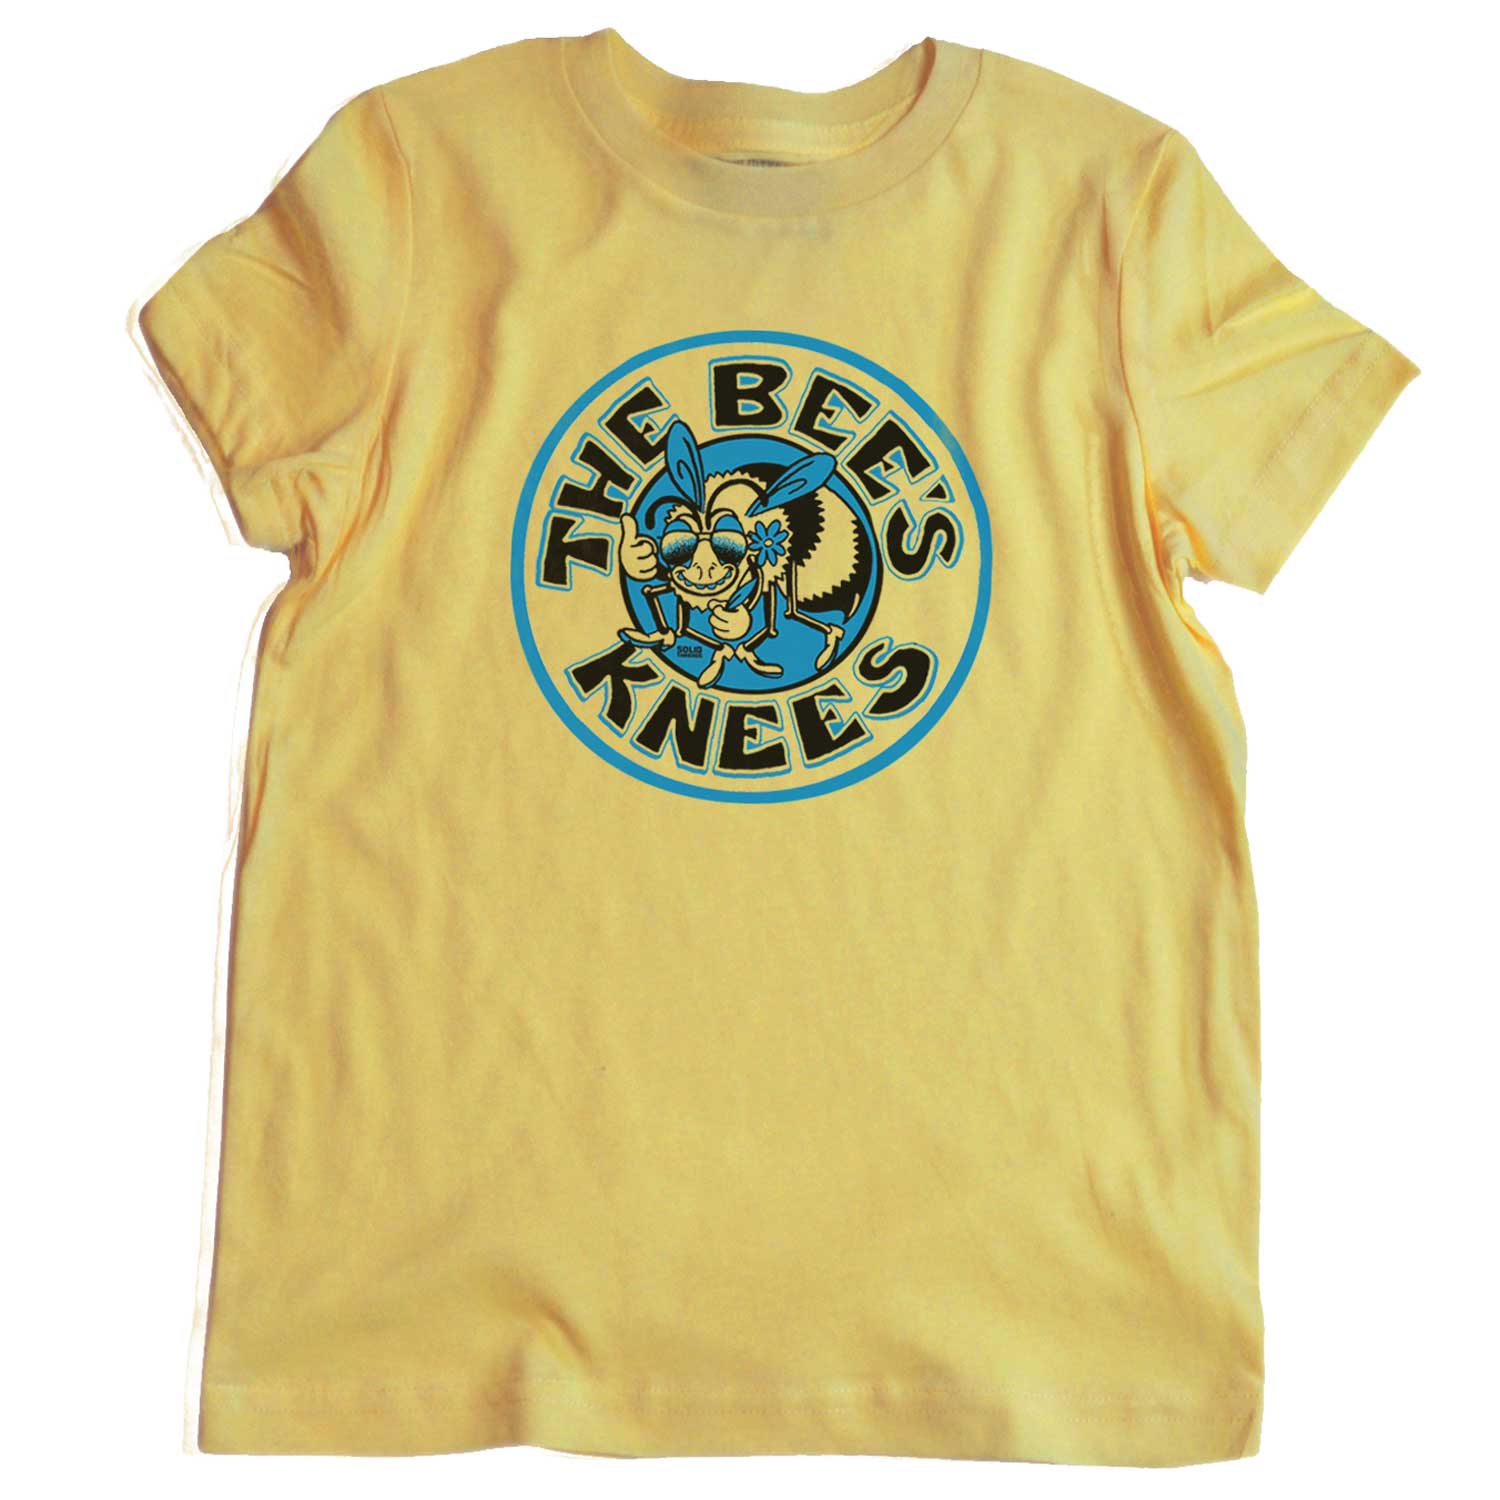 Kids The Bee's Knees Retro Nature Graphic T-Shirt | Funny Summer Pollinator Tee | Solid Threads